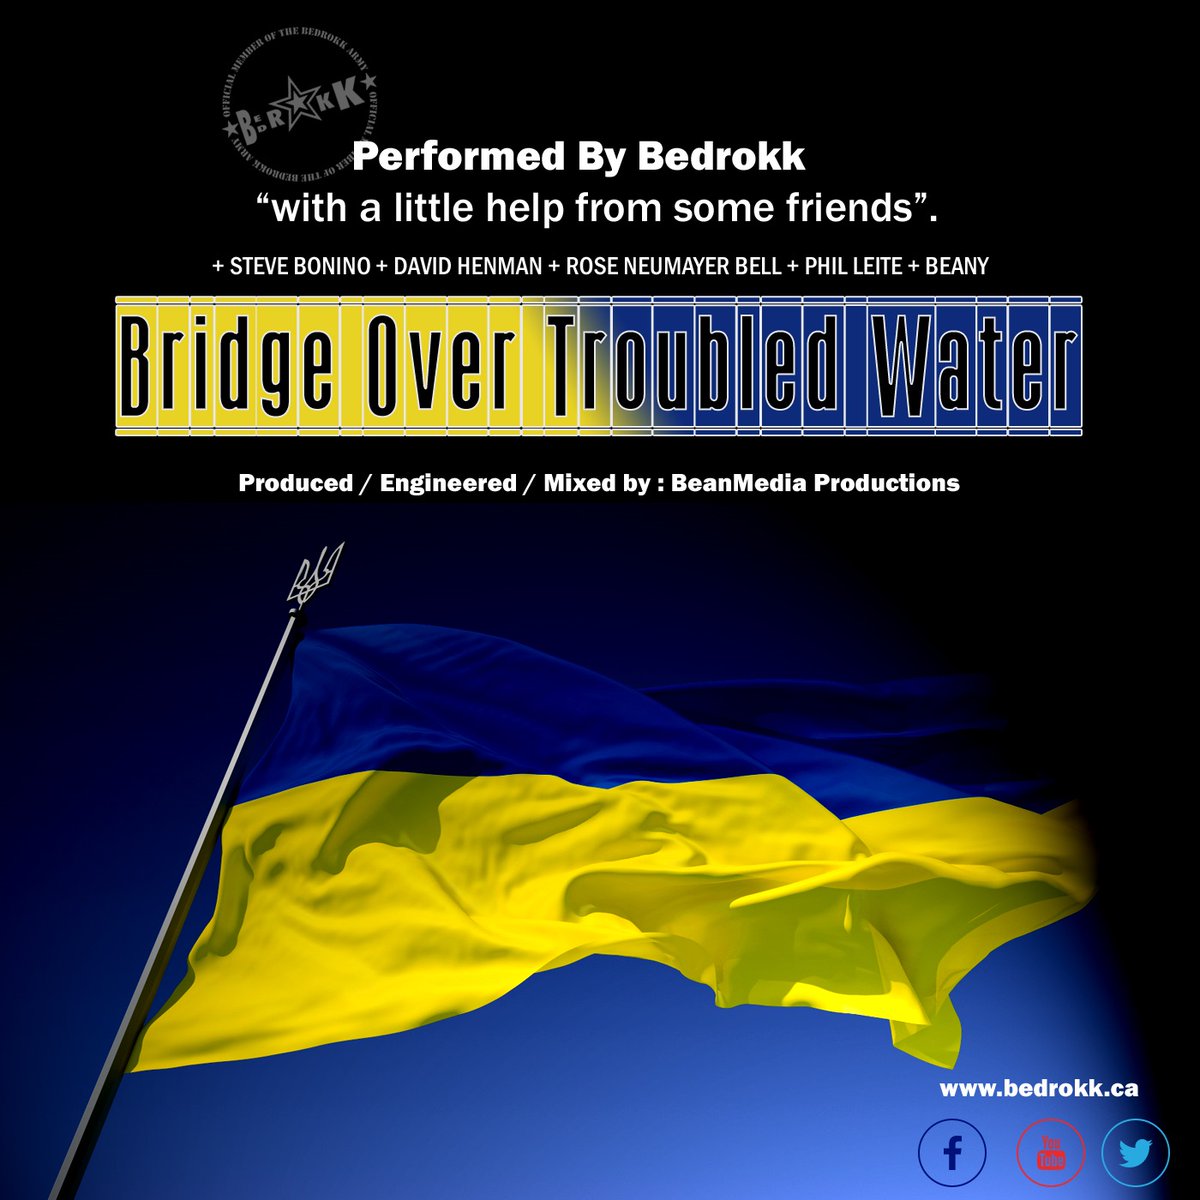 #StandWithUkriane #StandWithUkraineNOW
this Song is dedicated to the People Of #Ukraine...#StopTheWar 
**** CHECK OUT THE VIDEO ****
👇👇👇👇👇👇👇👇👇
youtu.be/A7aN6w_J5gY
'Bridge Over Troubled Water' by Bedrokk @BedrokkV8